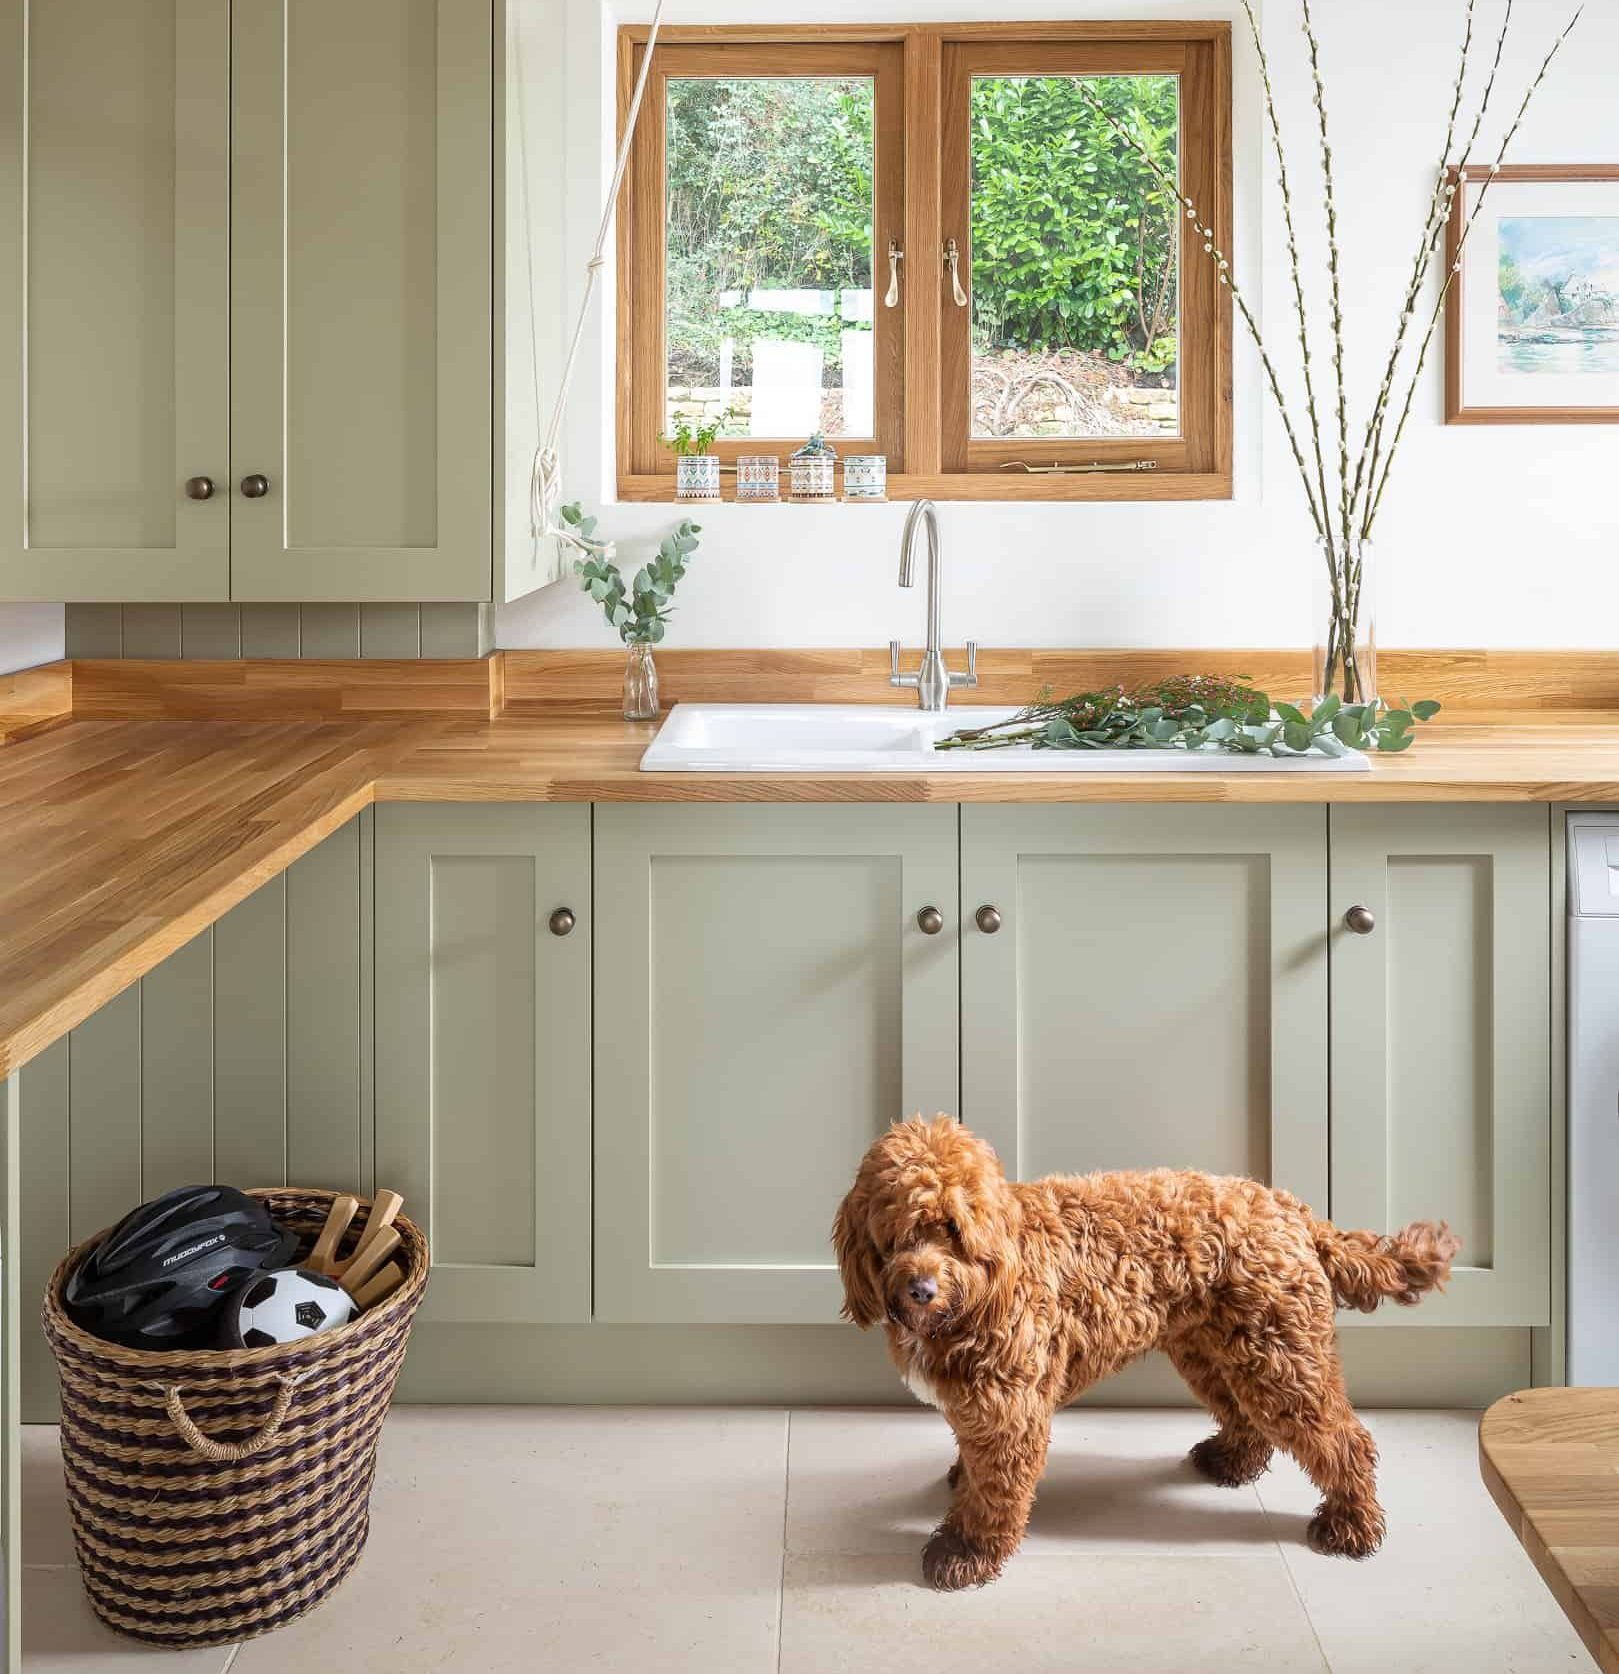 John Lewis of Hungerford utility room in light green shaker cabinetry with a wooden worktop